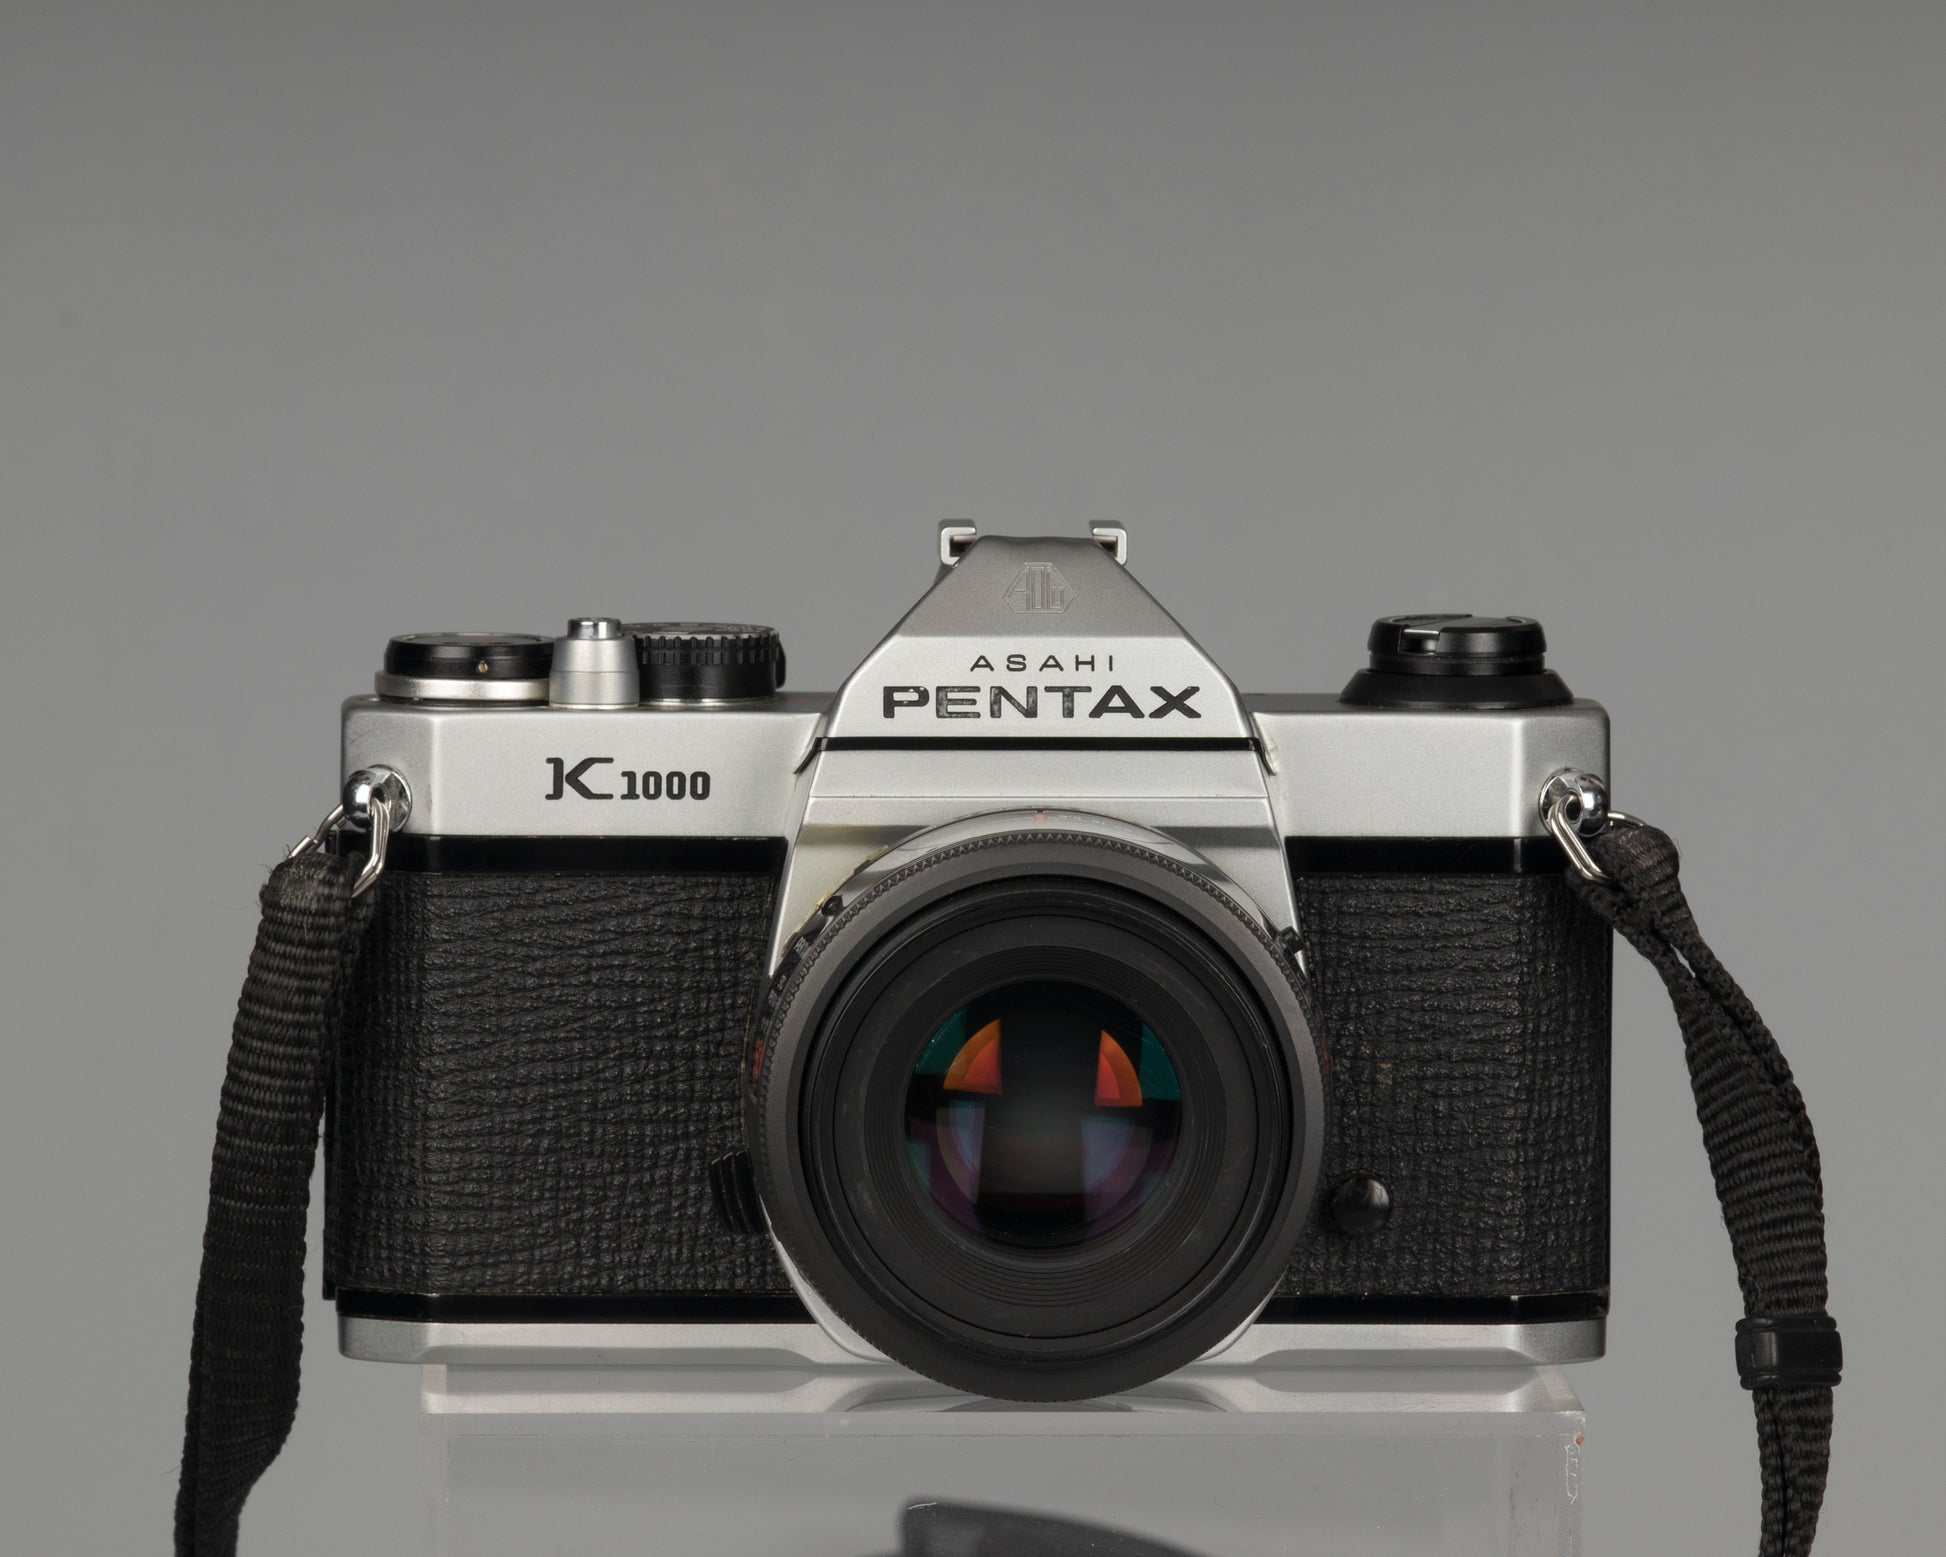 Pentax K1000 front view